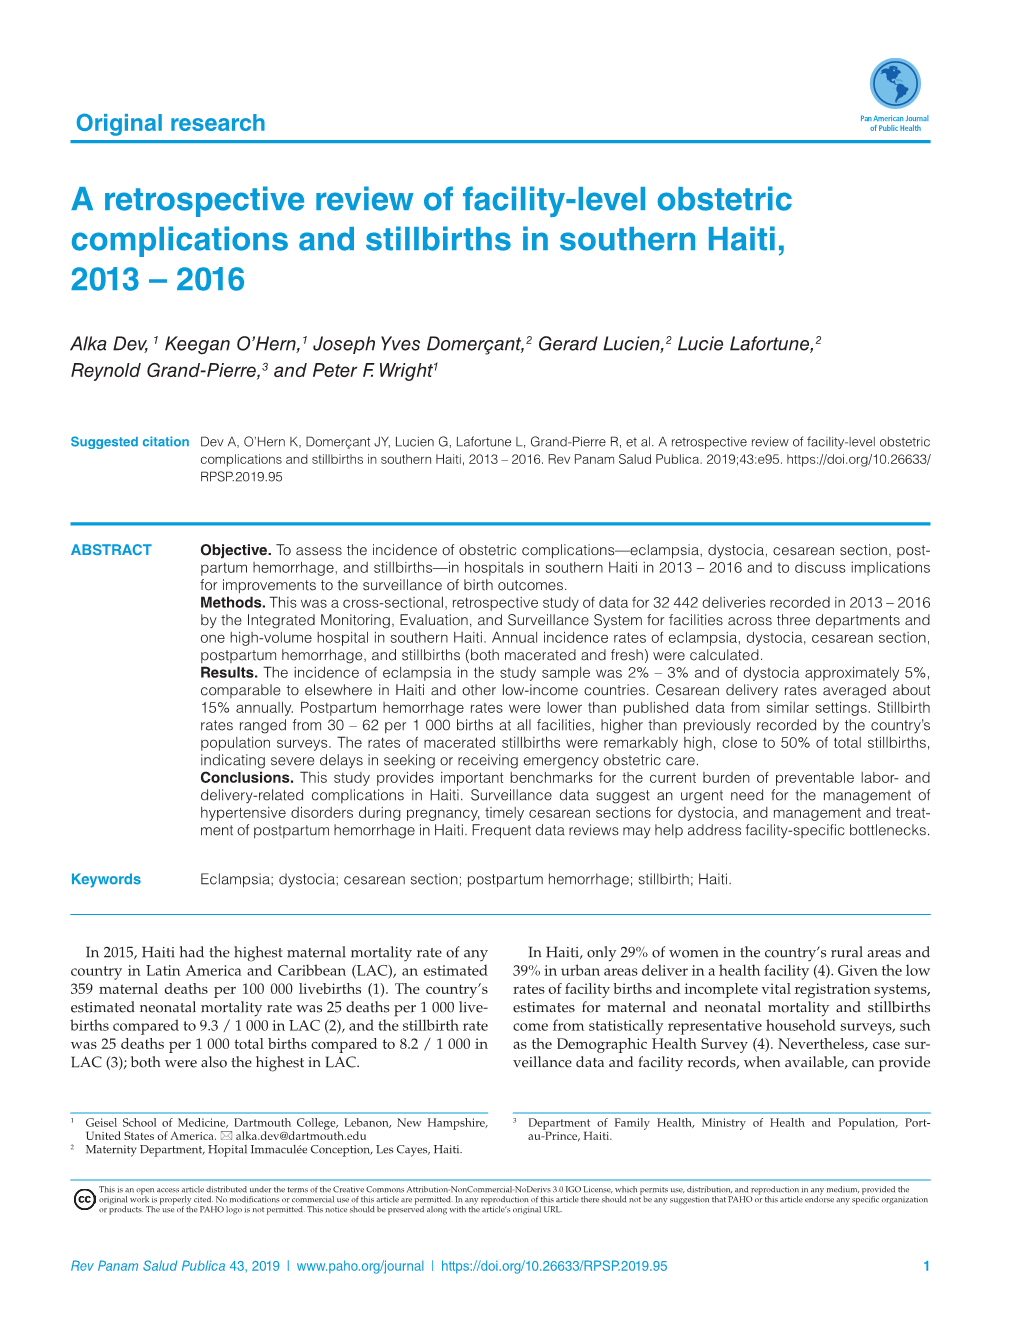 A Retrospective Review of Facility-Level Obstetric Complications